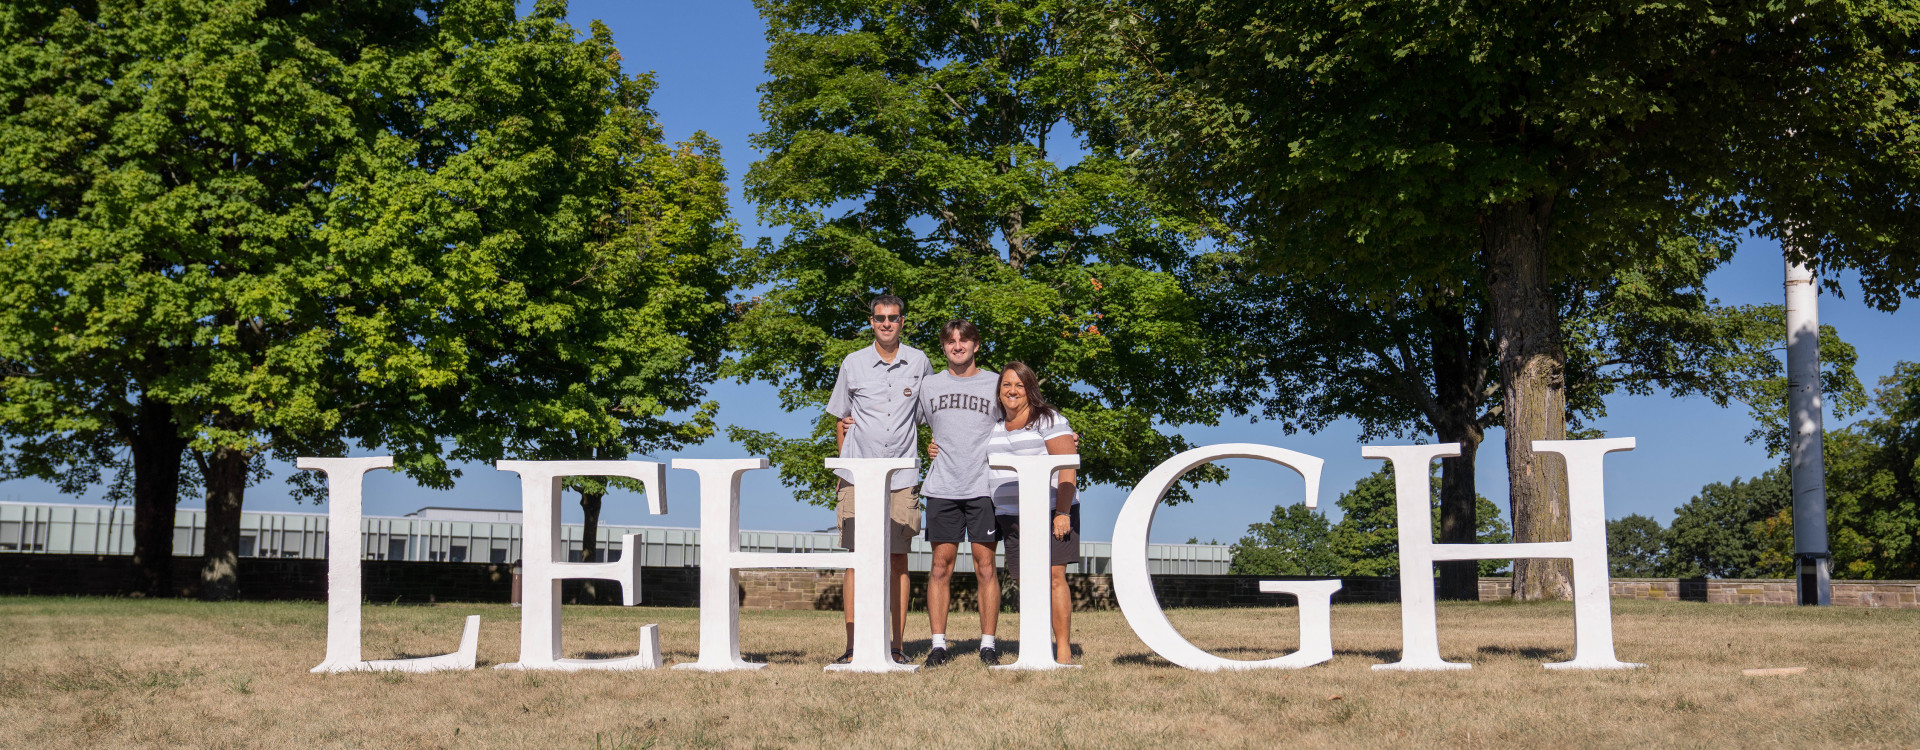 family with Lehigh letters at check-in